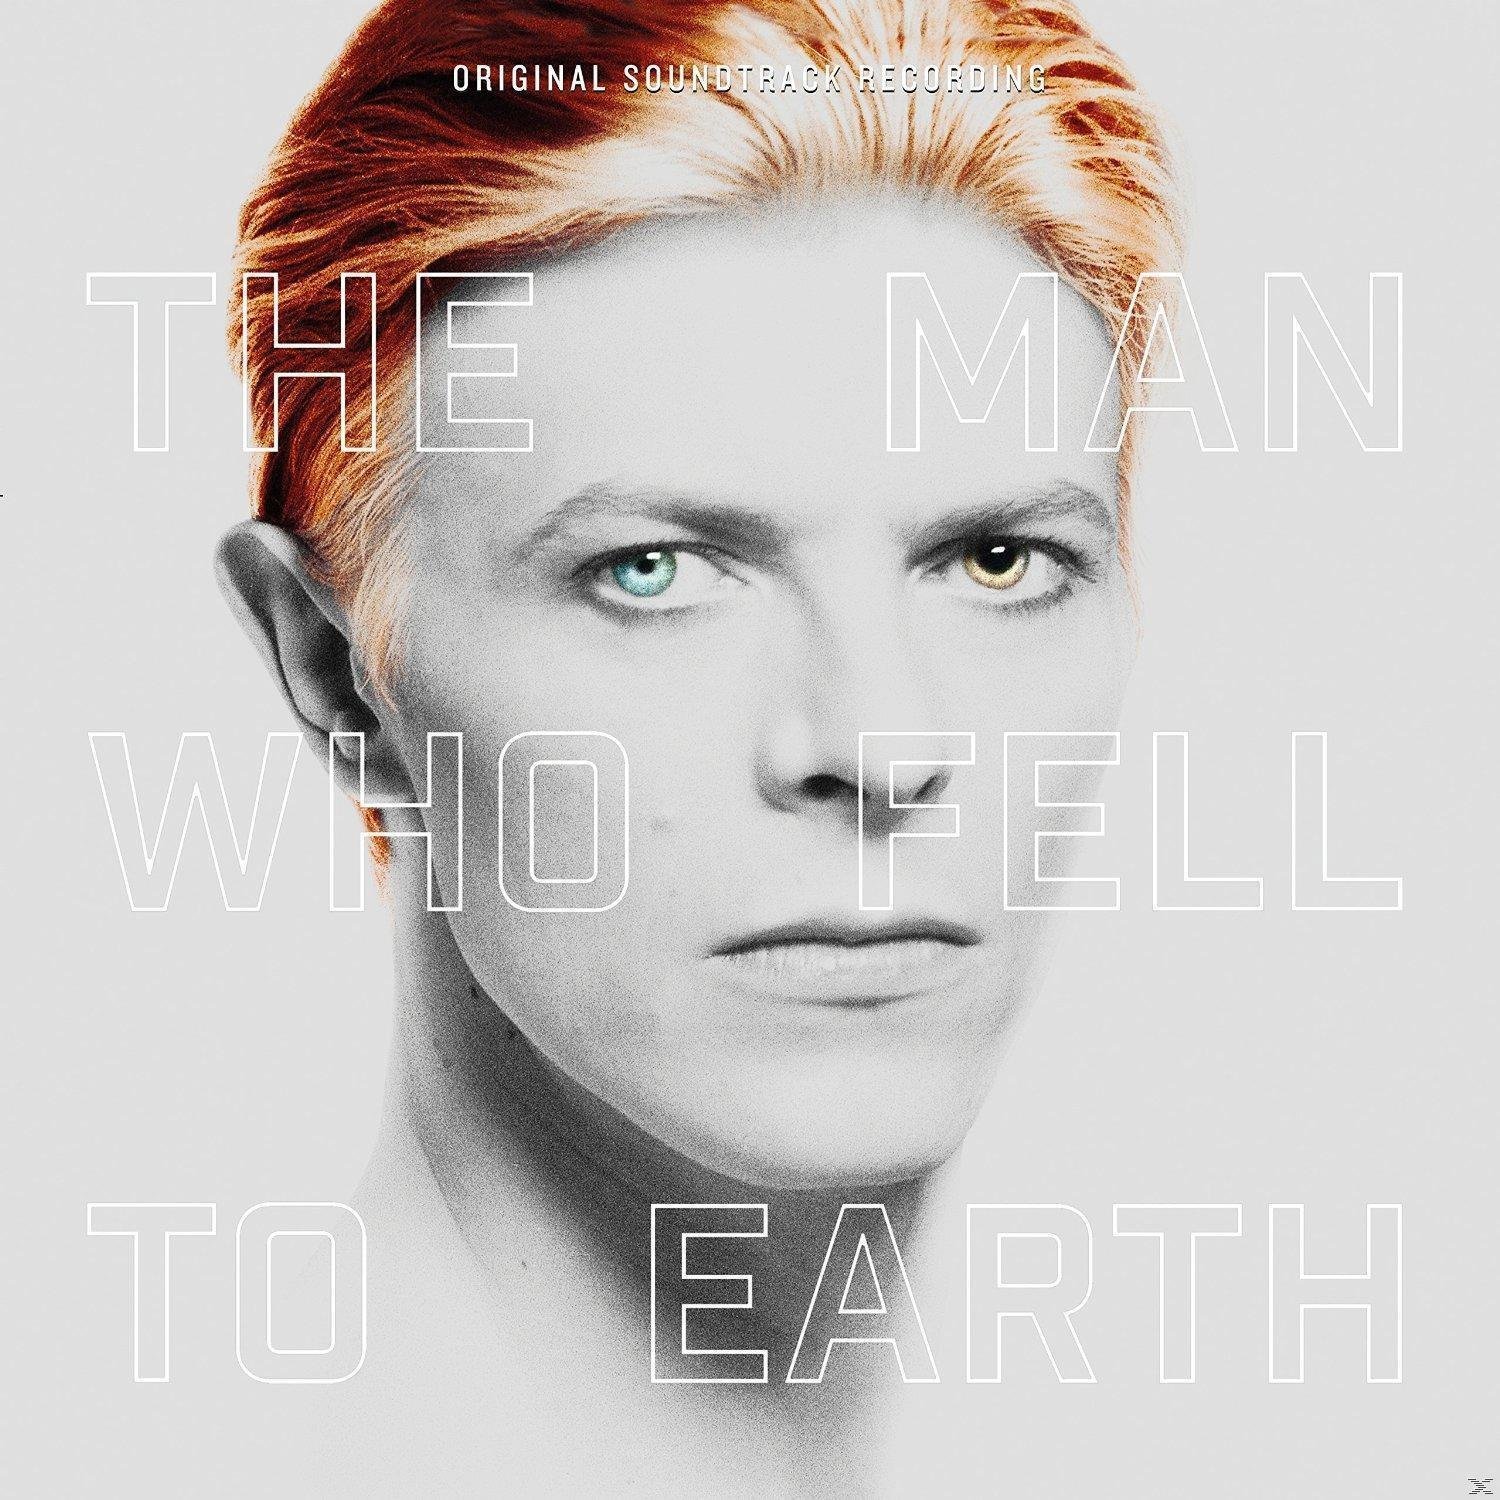 Vinyl Record David Bowie - The Man Who Fell To Earth OST (Starring David Bowie) (2 LP + 2 CD)